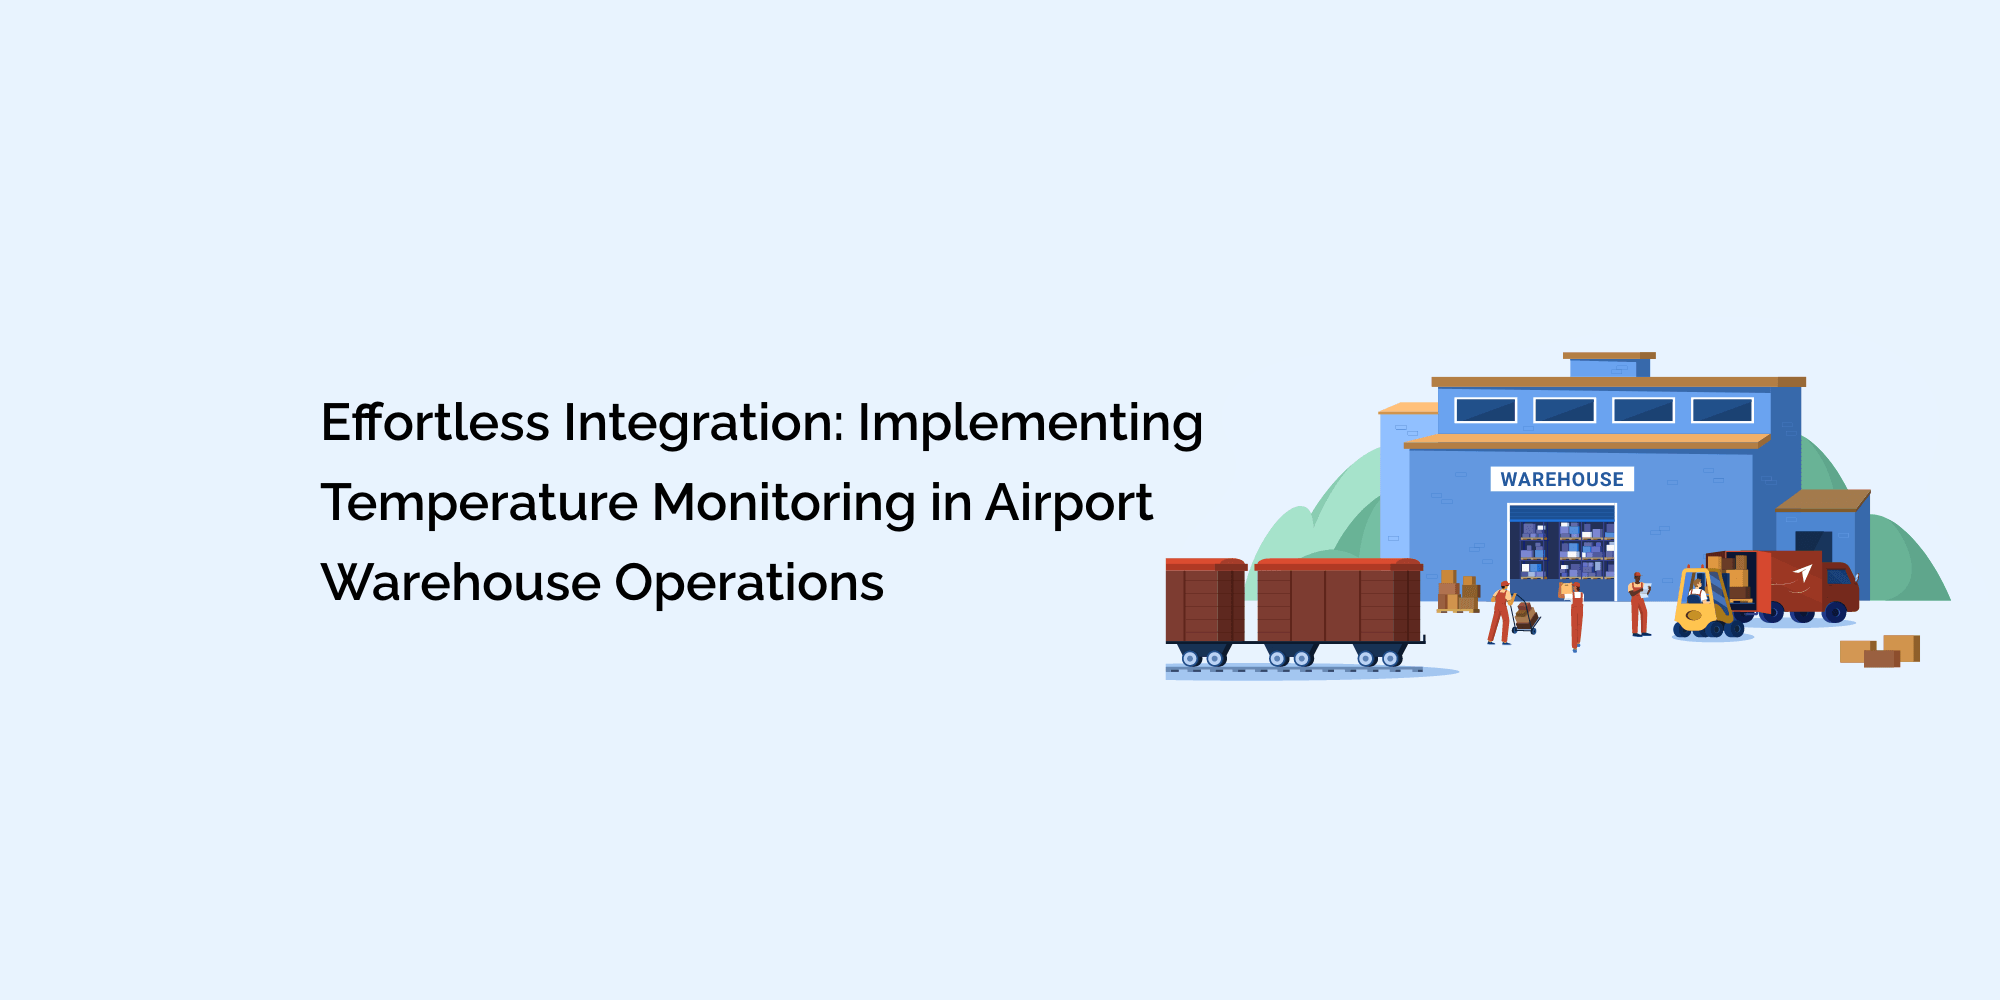 Effortless Integration: Implementing Temperature Monitoring in Airport Warehouse Operations